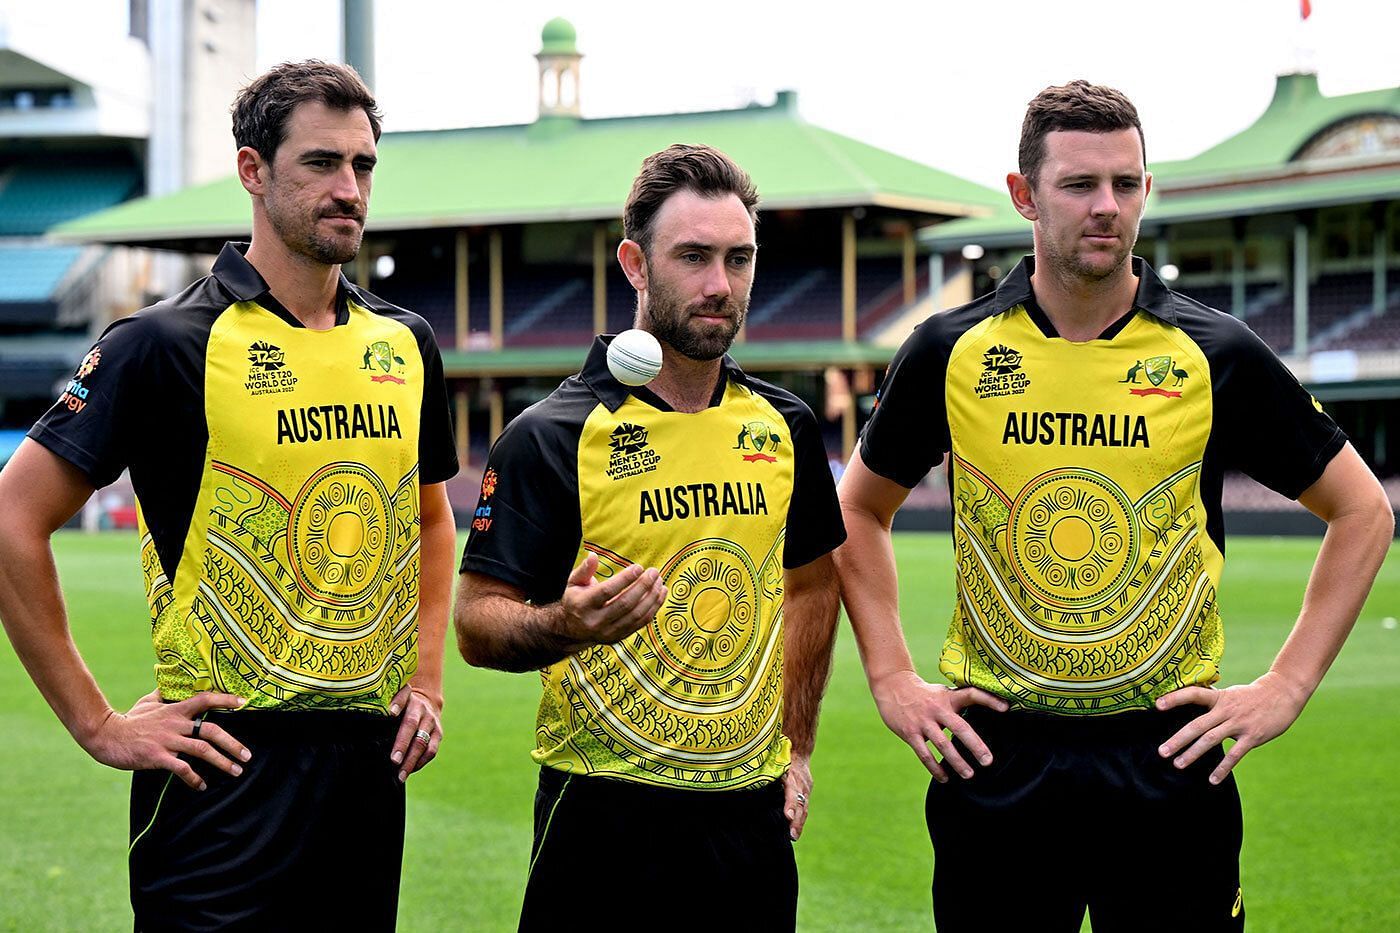 Mitchell Starc, Glenn Maxwell and Josh Hazlewood donning the Australian kit for the T20 World Cup 2022 [Pic Credit: ICC]